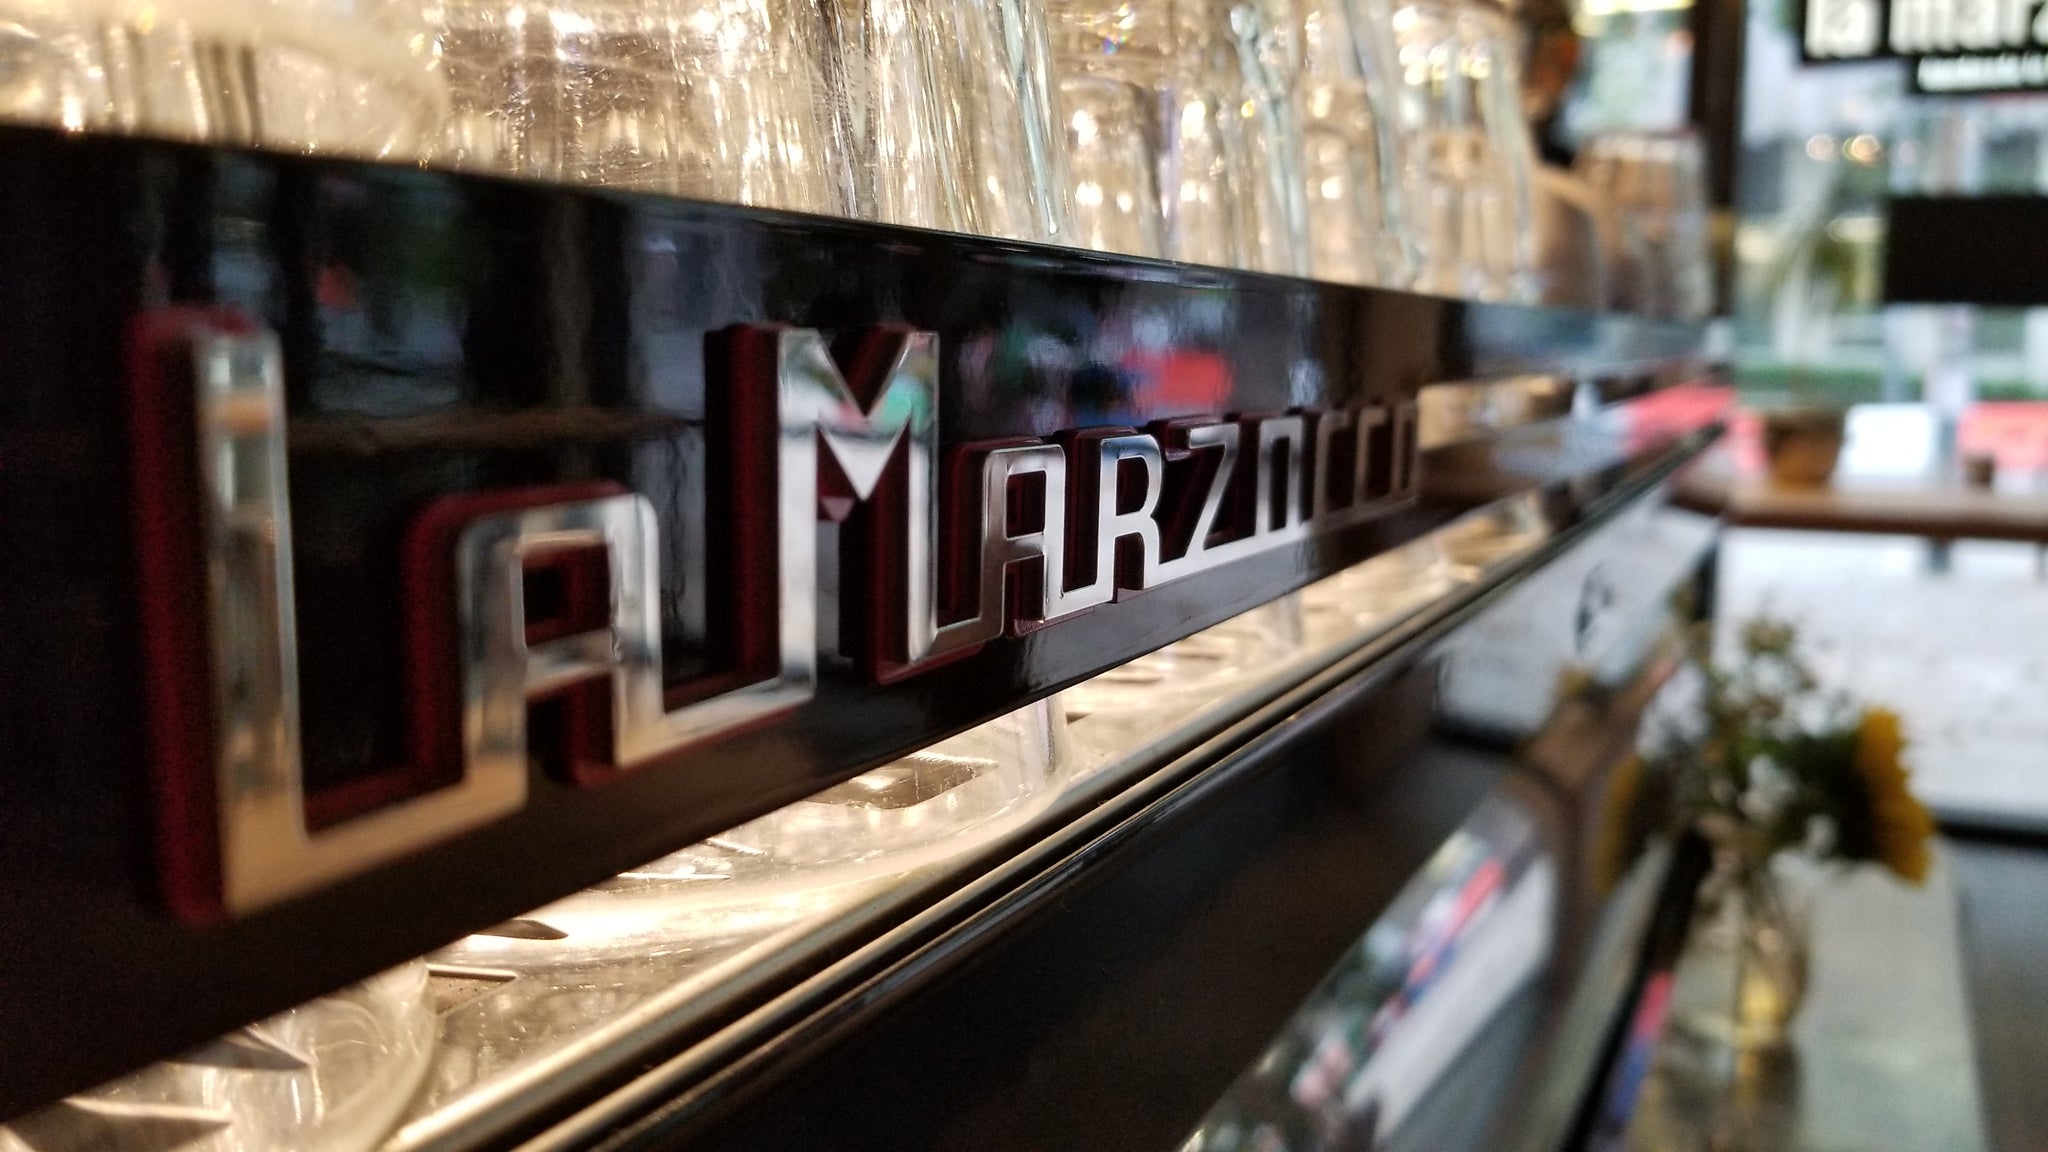 What does the La Marzocco roaster residency mean to us? What does it mean to be in the business of coffee? What are coffee houses for?